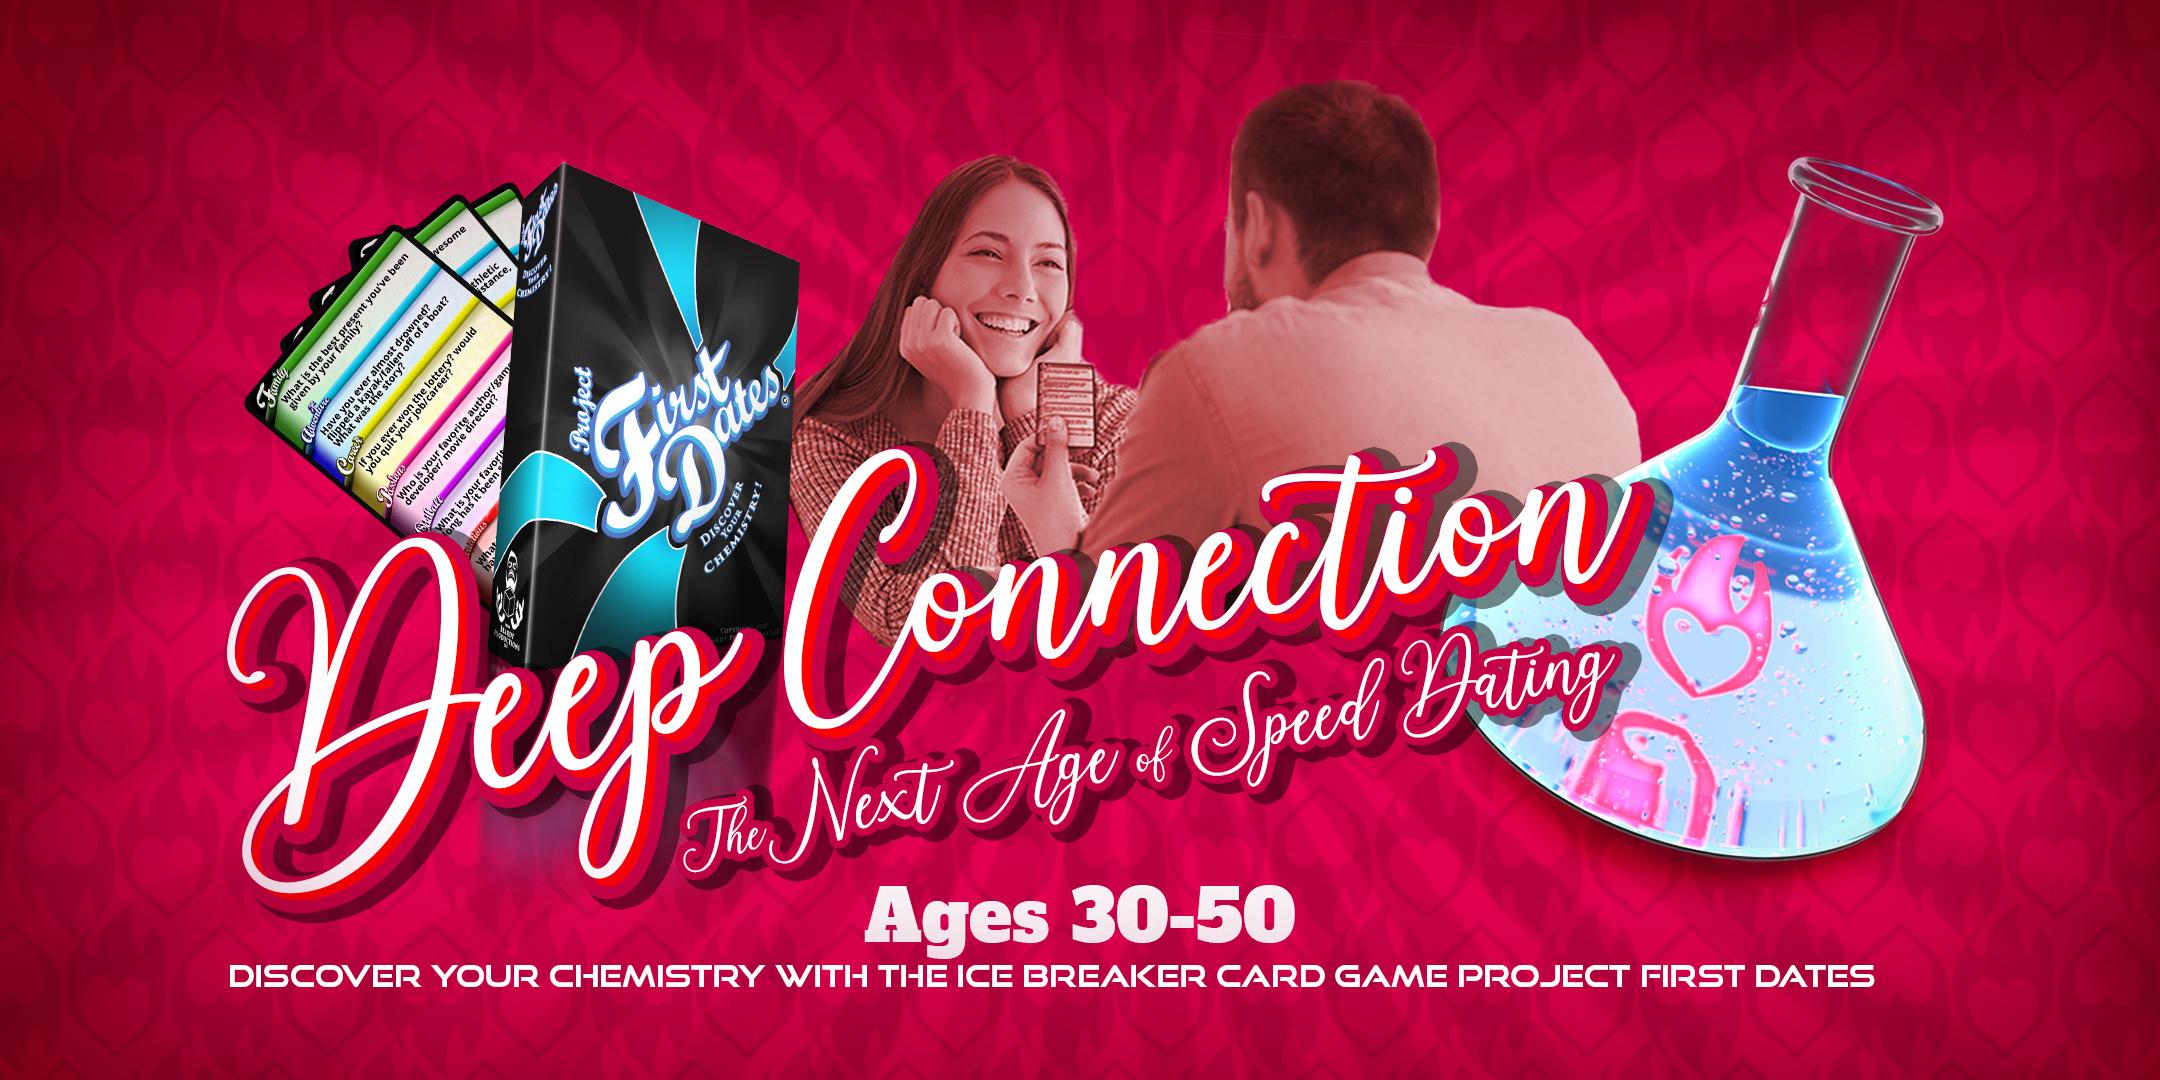 Deep Connection - The Next Age of Speed Dating - Ages 30-50